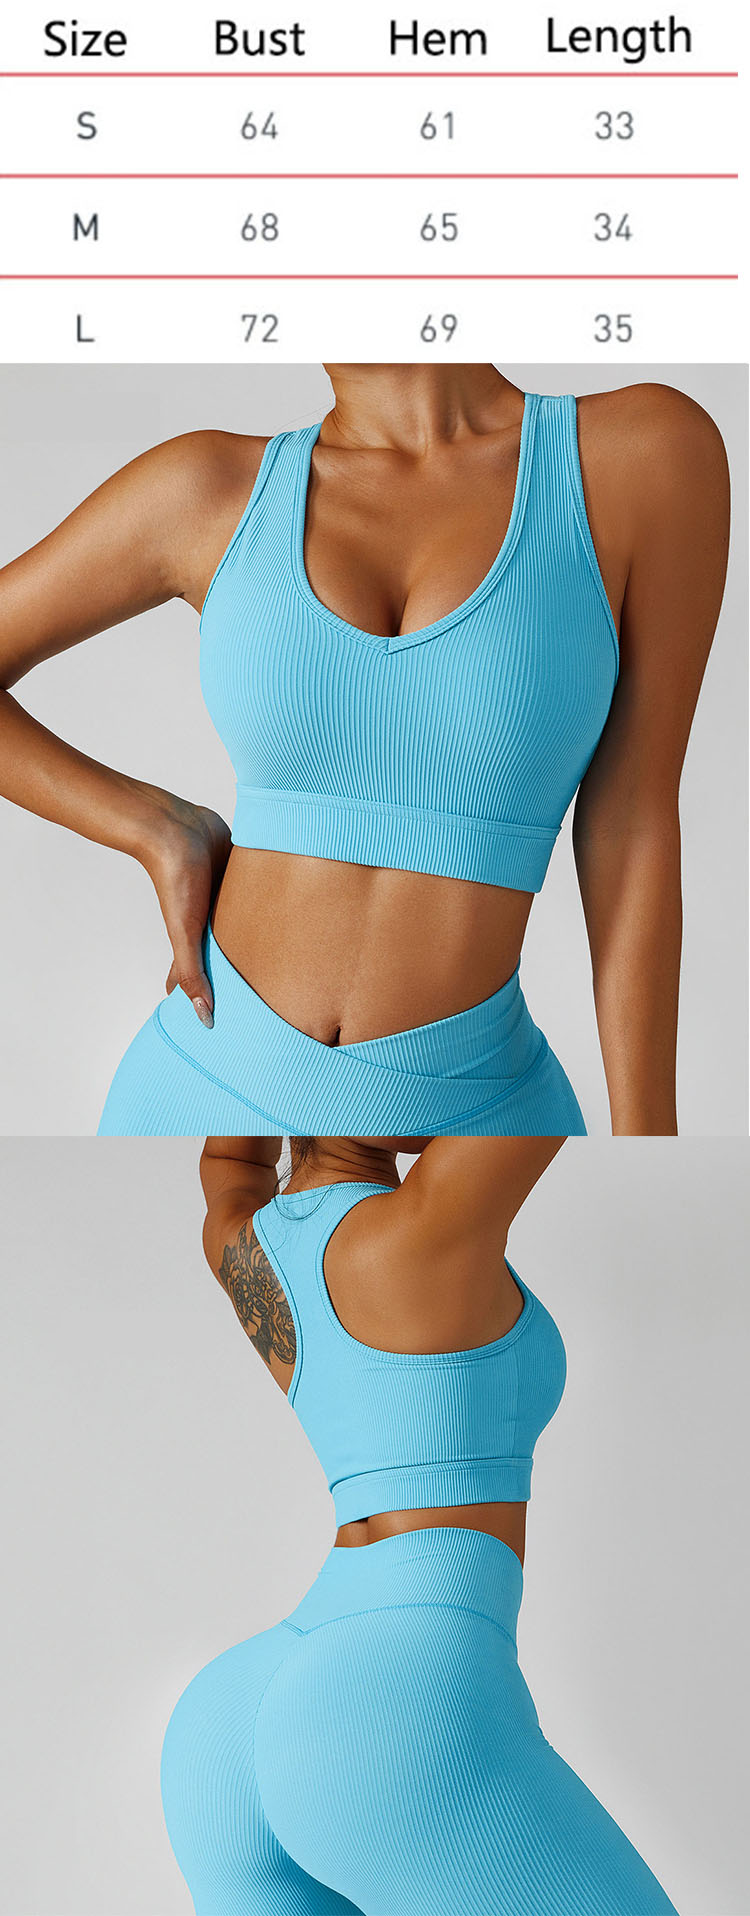 The front design of large sports bra is so intuitive that we often forget the design of the back